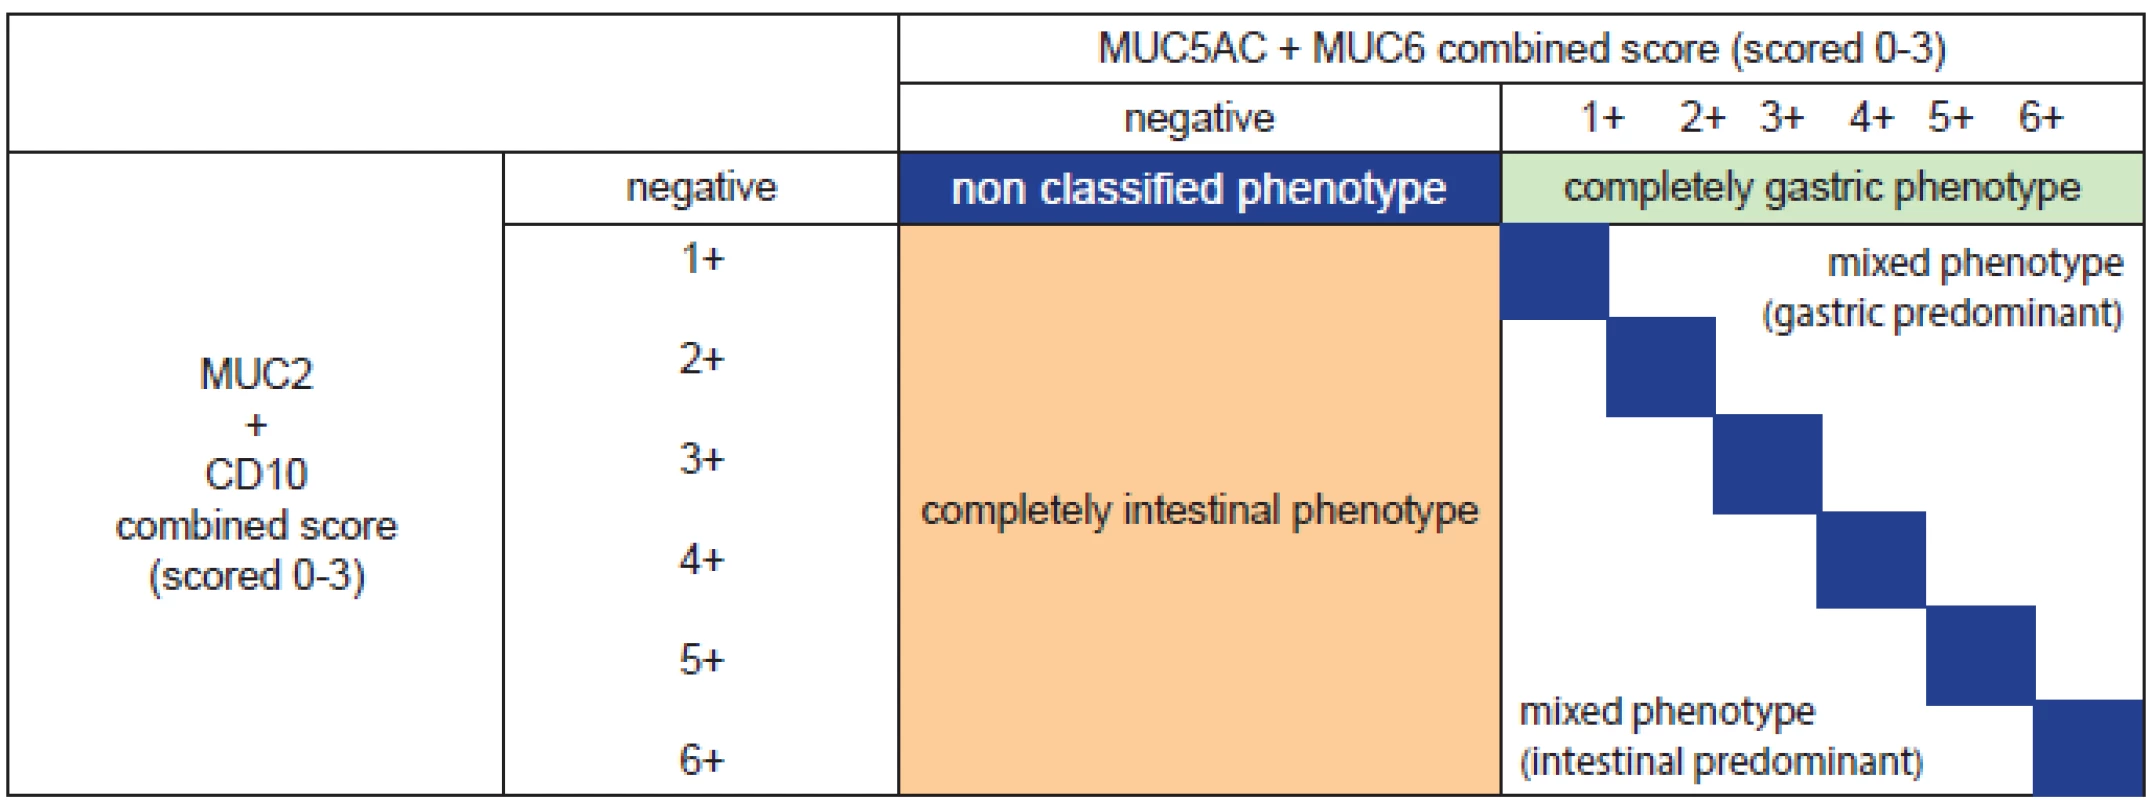 Phenotypic classification by expression of mucins (MUC5AC, MUC6, MUC2) and CD10 (modified from (53). All markers are scored as following: negative = 0-4 % reactivity, 1+ = 5-30 %, 2+ = 31-60 %, 3+ &gt;60 %. Some tumors have a phenotype that is either entirely gastric (green box) or enterily intestinal (orange box), while a small proportion have no identifiable (nonclassified) phenotype (large blue box). However, many tumors express both gastric and intestinal phenotypes (lower right) and these may be either predominantely intestinal (below and to the left of the blue boxes=, or predomintantely gastric (above and right of the blue boxes). The blue boxes themselves indicate tumors that express roughly equal quantities of both intestinal and gastric markers, varying from minimal (grade 1 of each) to grade 6 (abundant expression of both). Noteworthy that with degree of neoplasia entirely and predominantely intestinal phenotypes become lesser and entirely gastric differentiated tumors are seen more often together with a marked proportion of mixed phenotypes predominantely gastric (53). In practice, the routine use of immunohistochemistry outside from studies is not recommended.